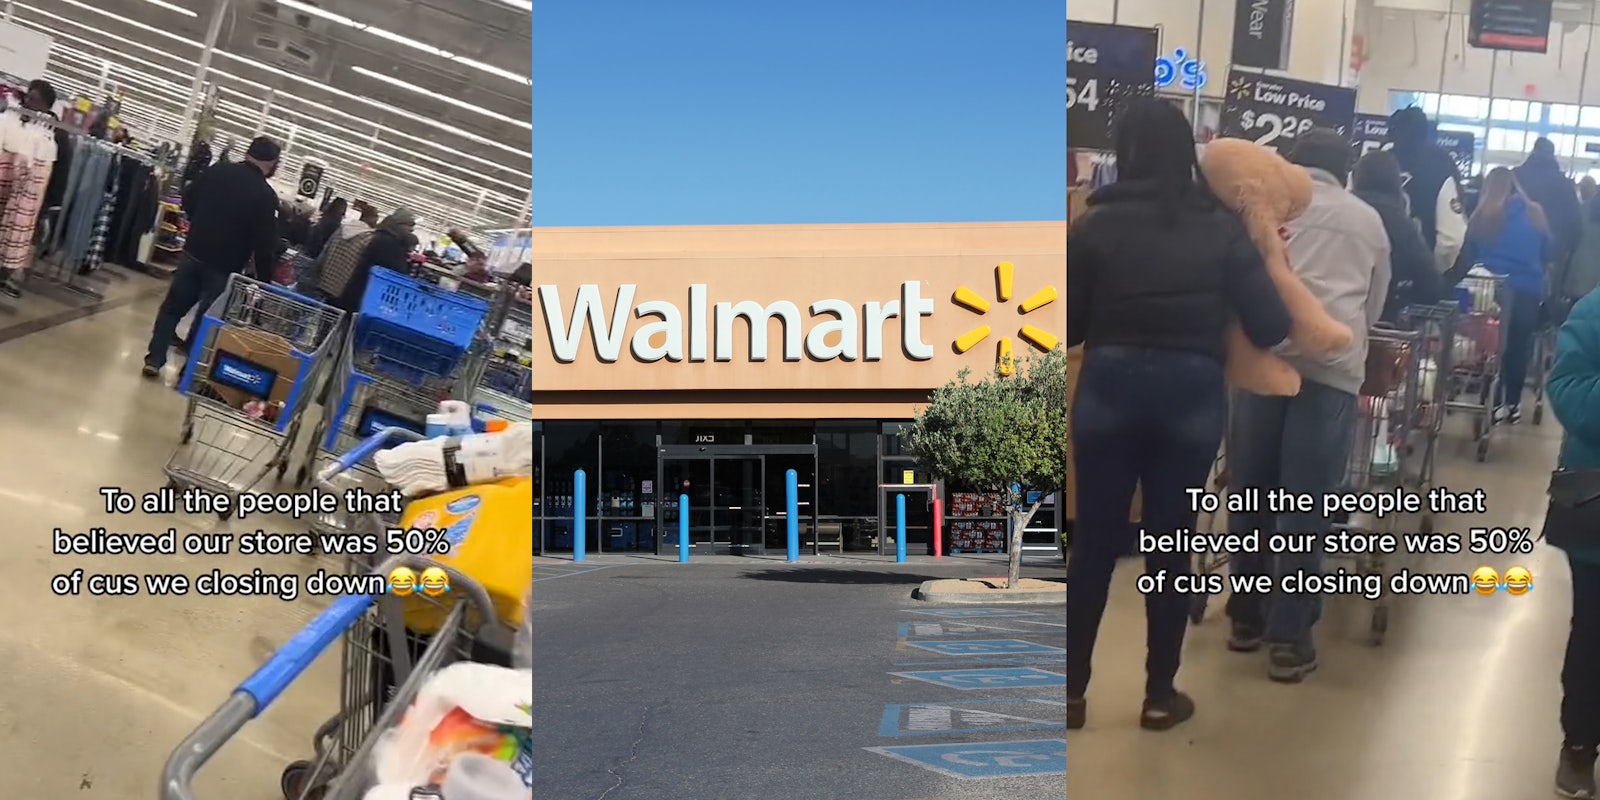 Walmart customers with caption ' To all the people that believed our store was 50% of cus we closing down' (l) Walmart building with sign and blue sky (c) Walmart customers with caption ' To all the people that believed our store was 50% of cus we closing down' (r)